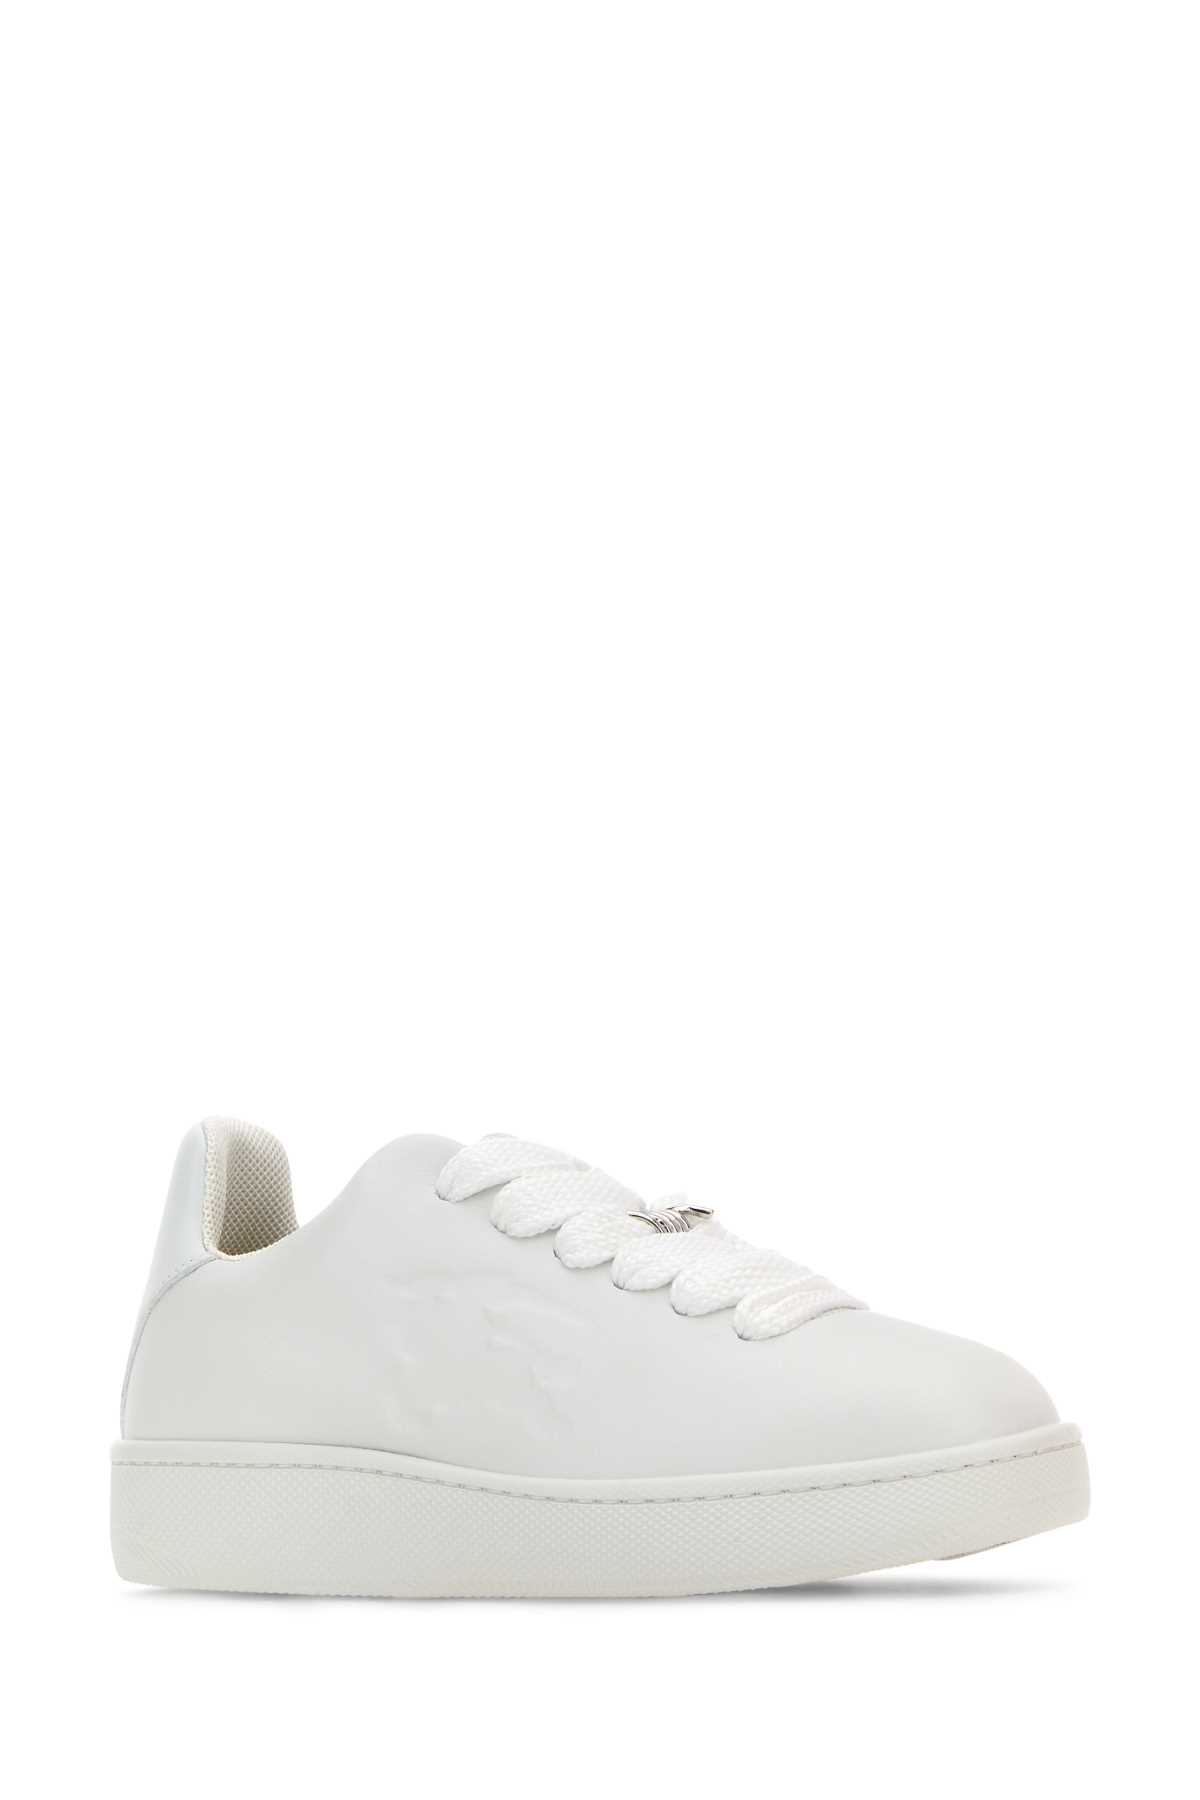 Shop Burberry White Leather Box Sneakers